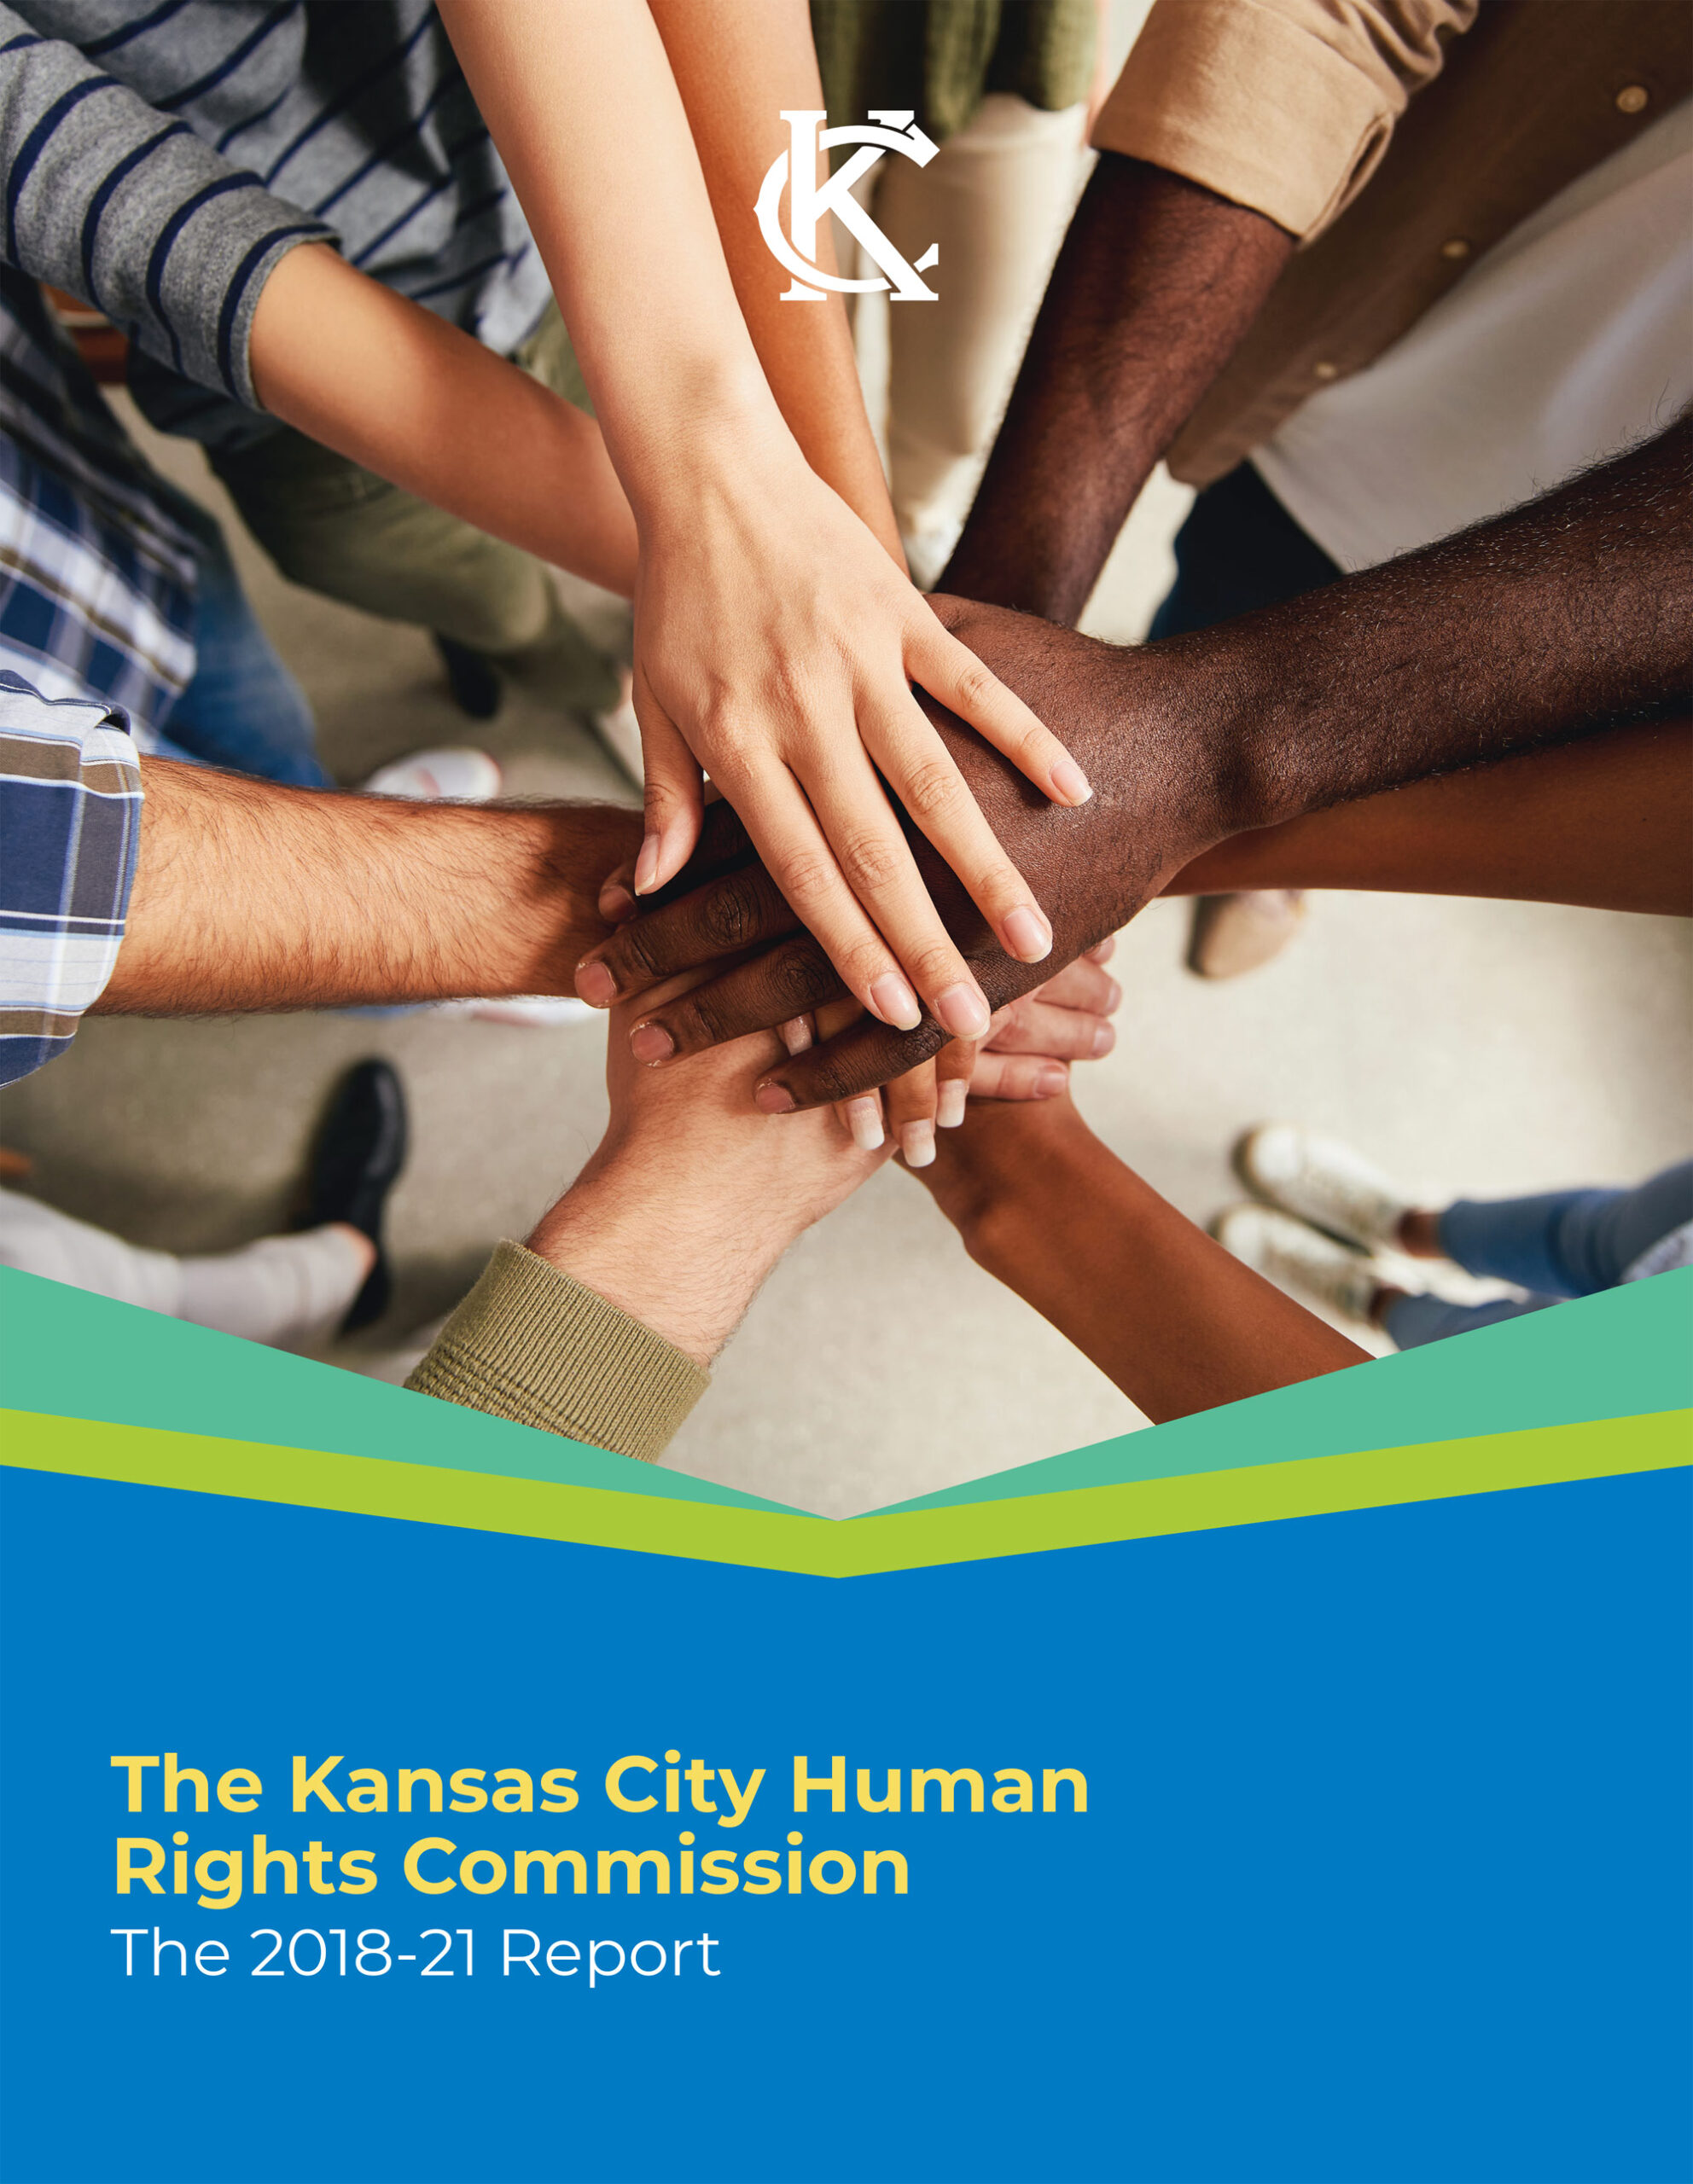 The Kansas City Human Rights Commission Annual Report